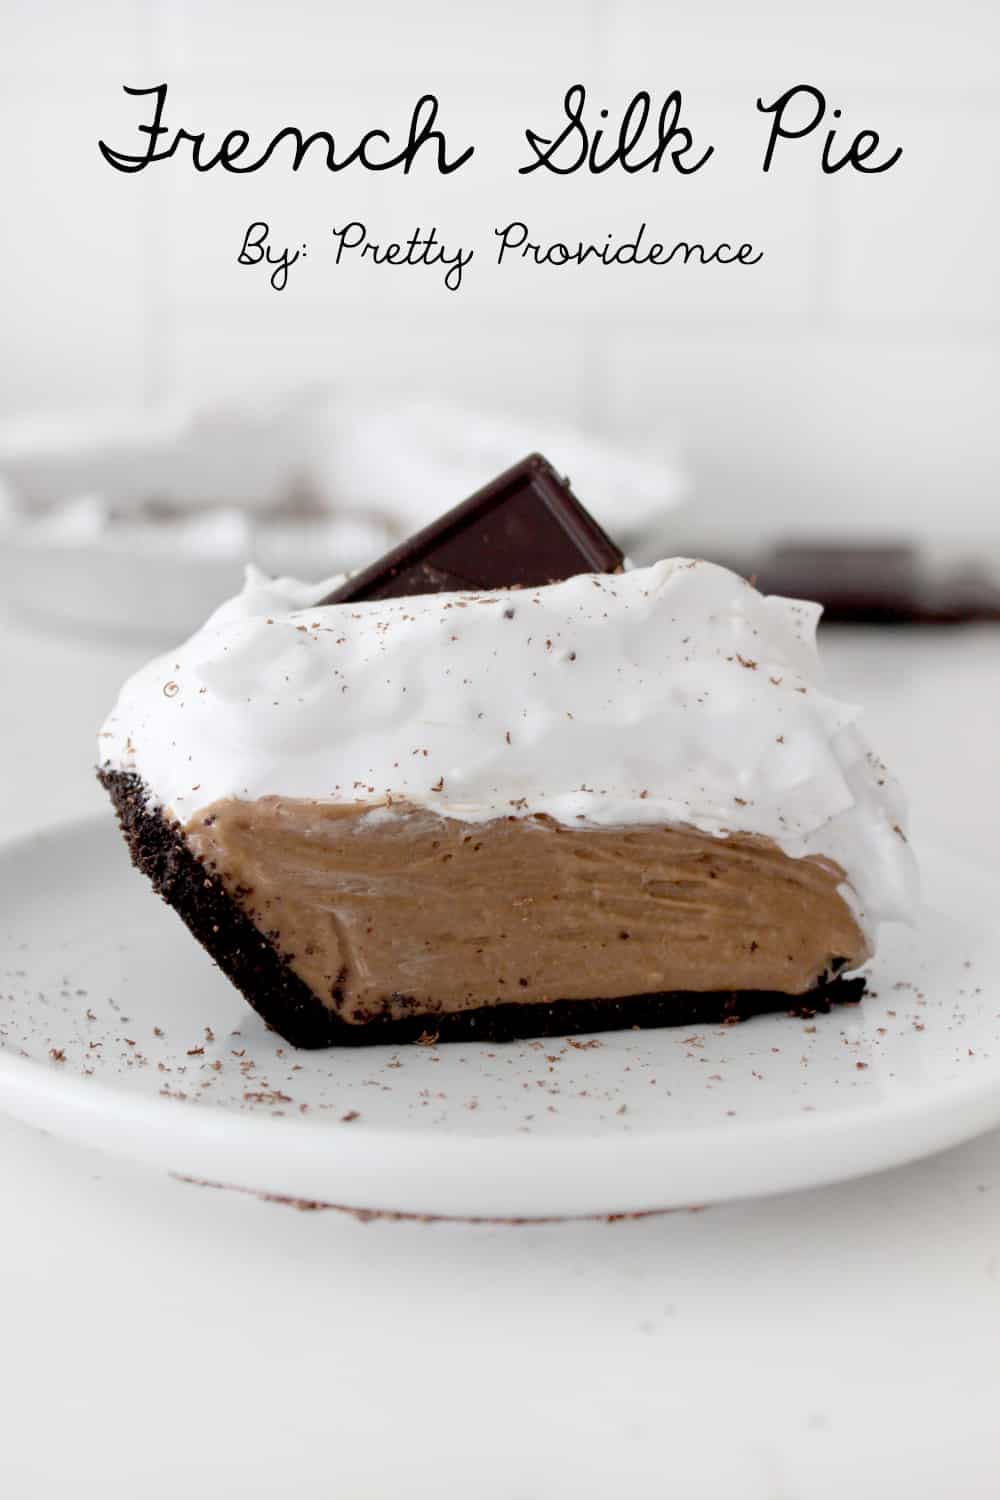 Chocoholics unite! This french silk pie is out of this world delicious! We've never had a Thanksgiving without this staple and best part is, it's so easy to make! 